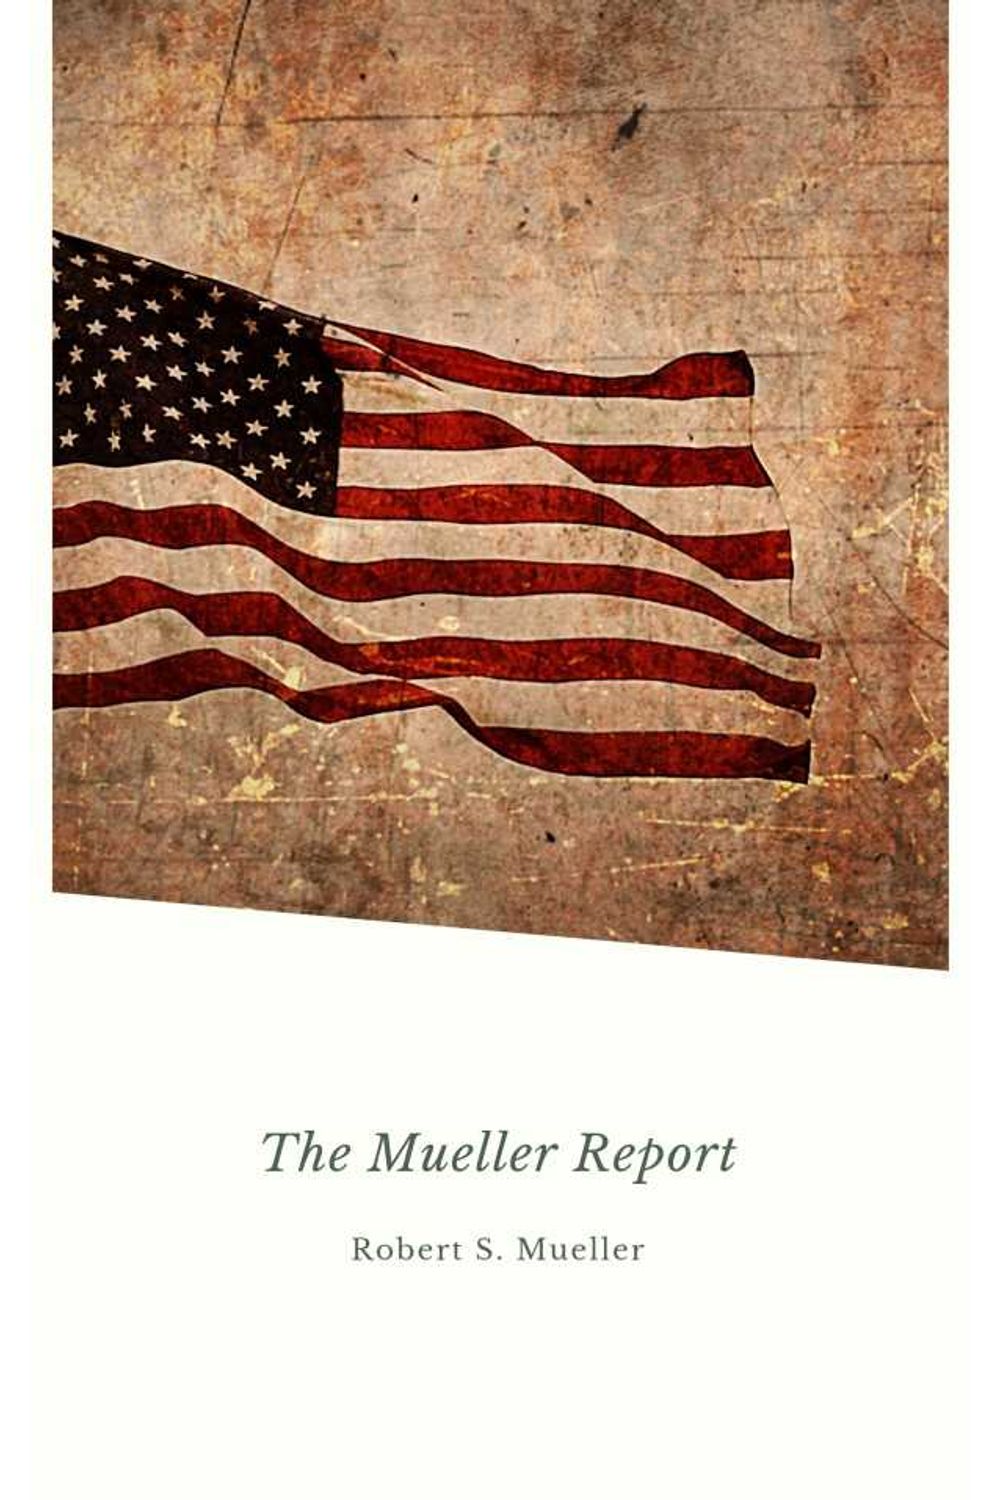 bw-report-on-the-investigation-into-russian-interference-in-the-2016-presidential-election-mueller-report-arthur-wallens-9782291063506